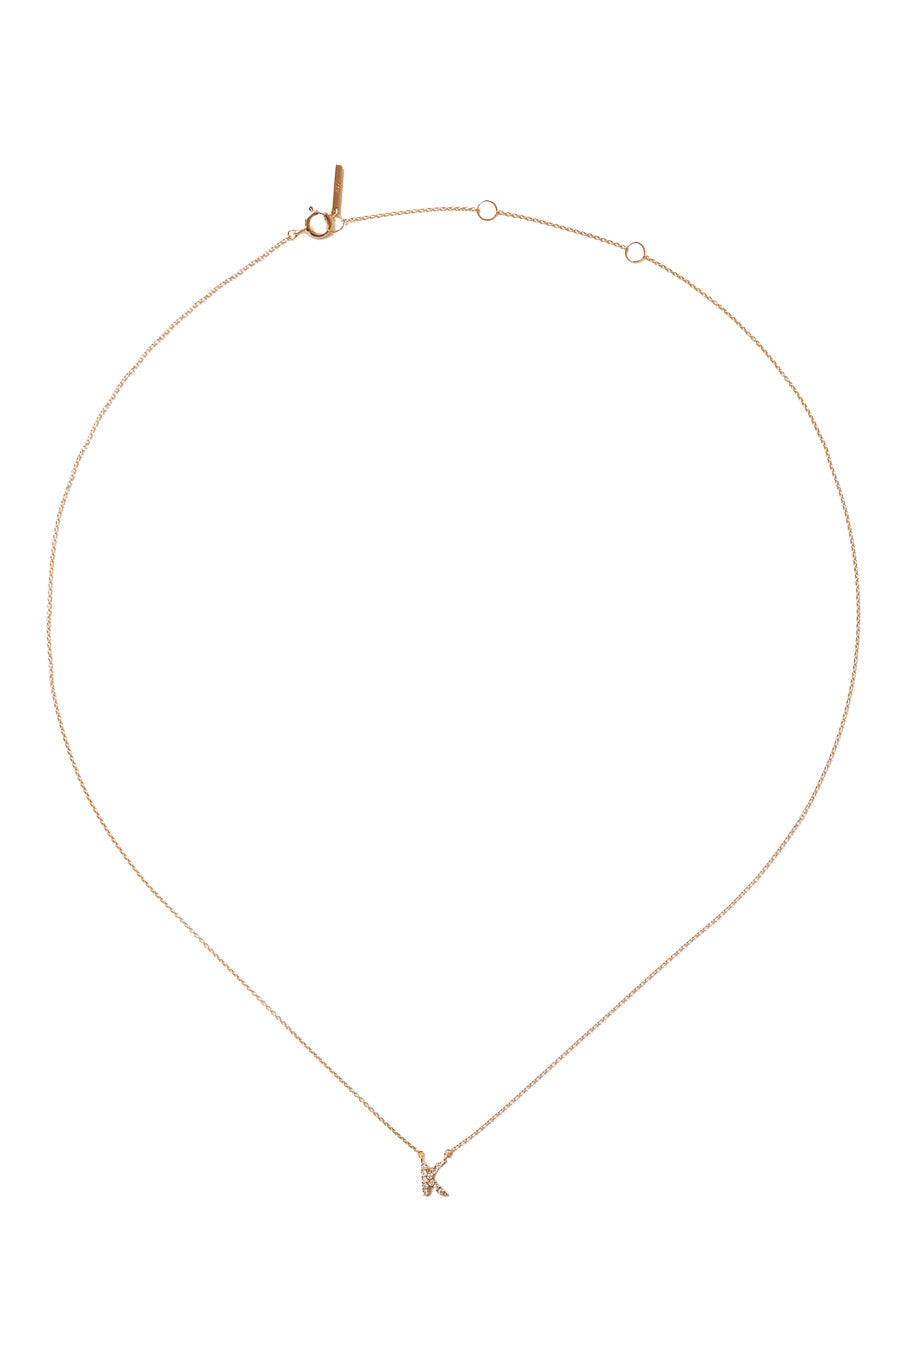 Chan Luu 14k Gold and White Diamond Initial Necklace